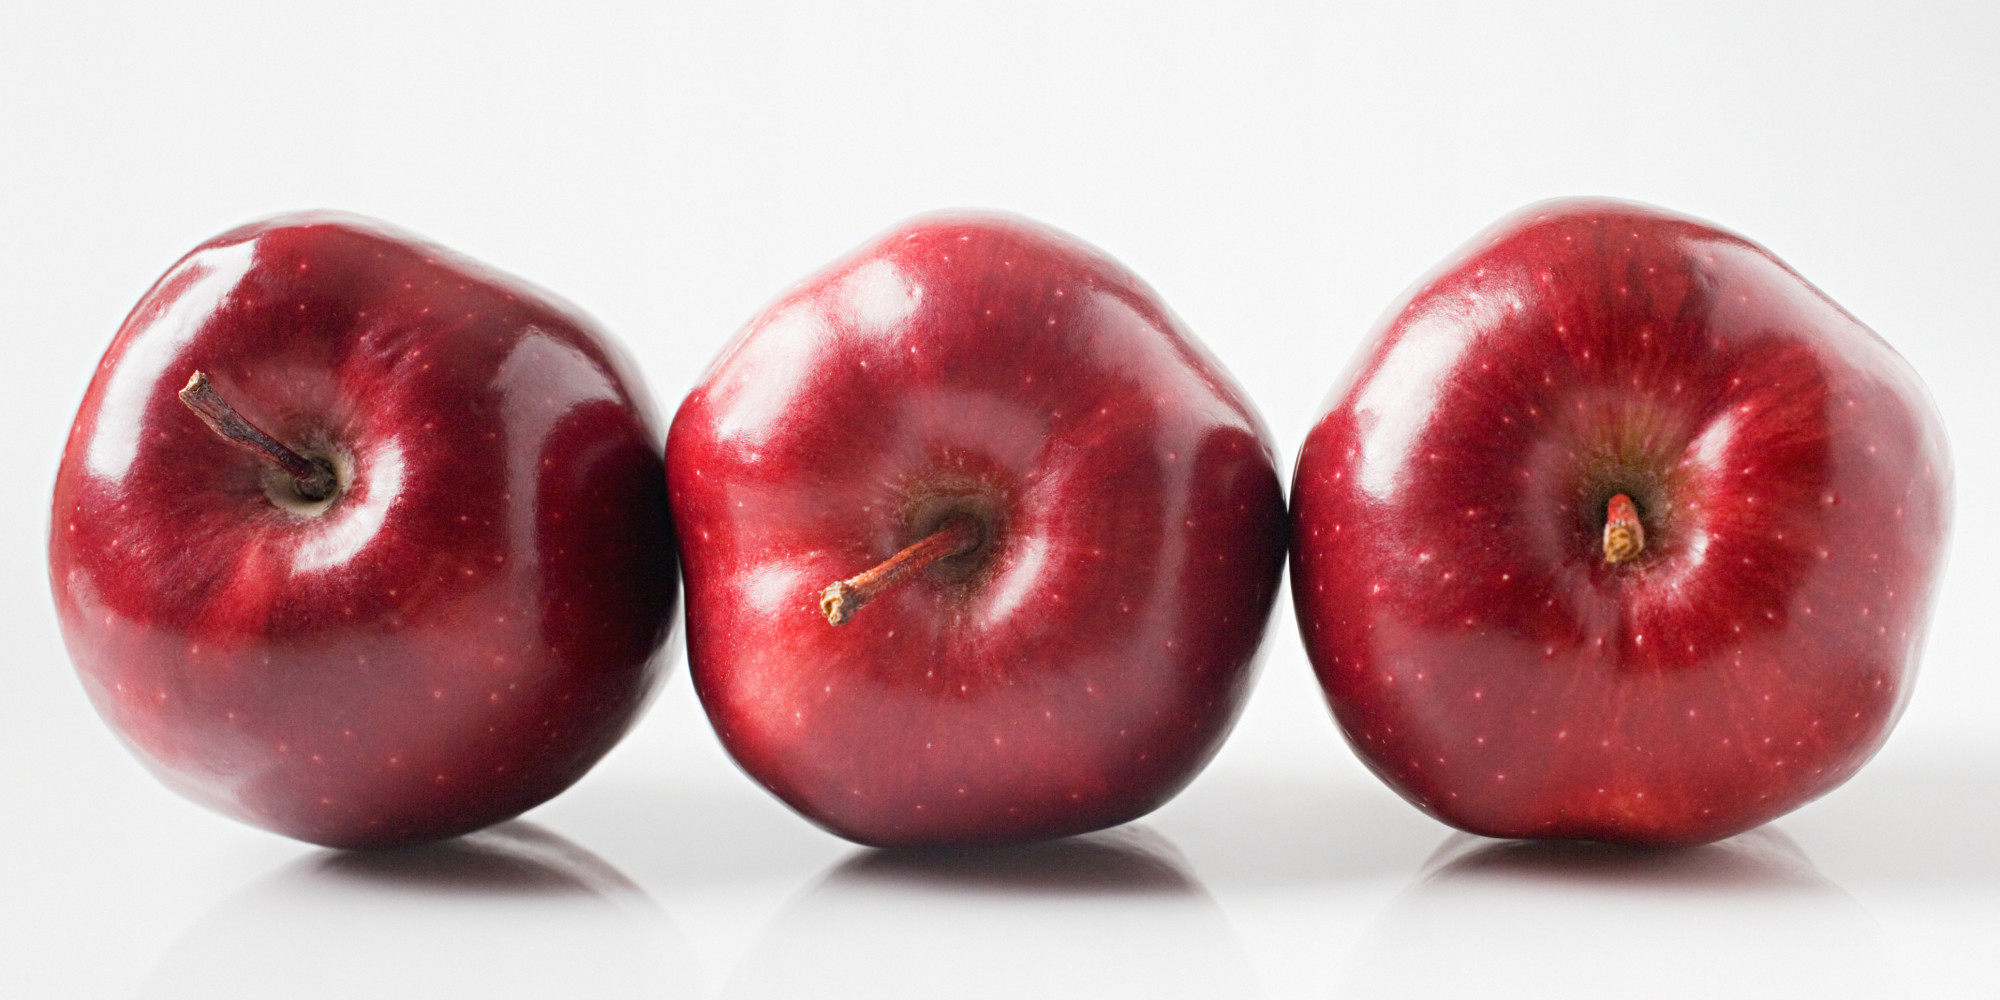 I Wish Red Delicious Apples Would Just Go Away | HuffPost